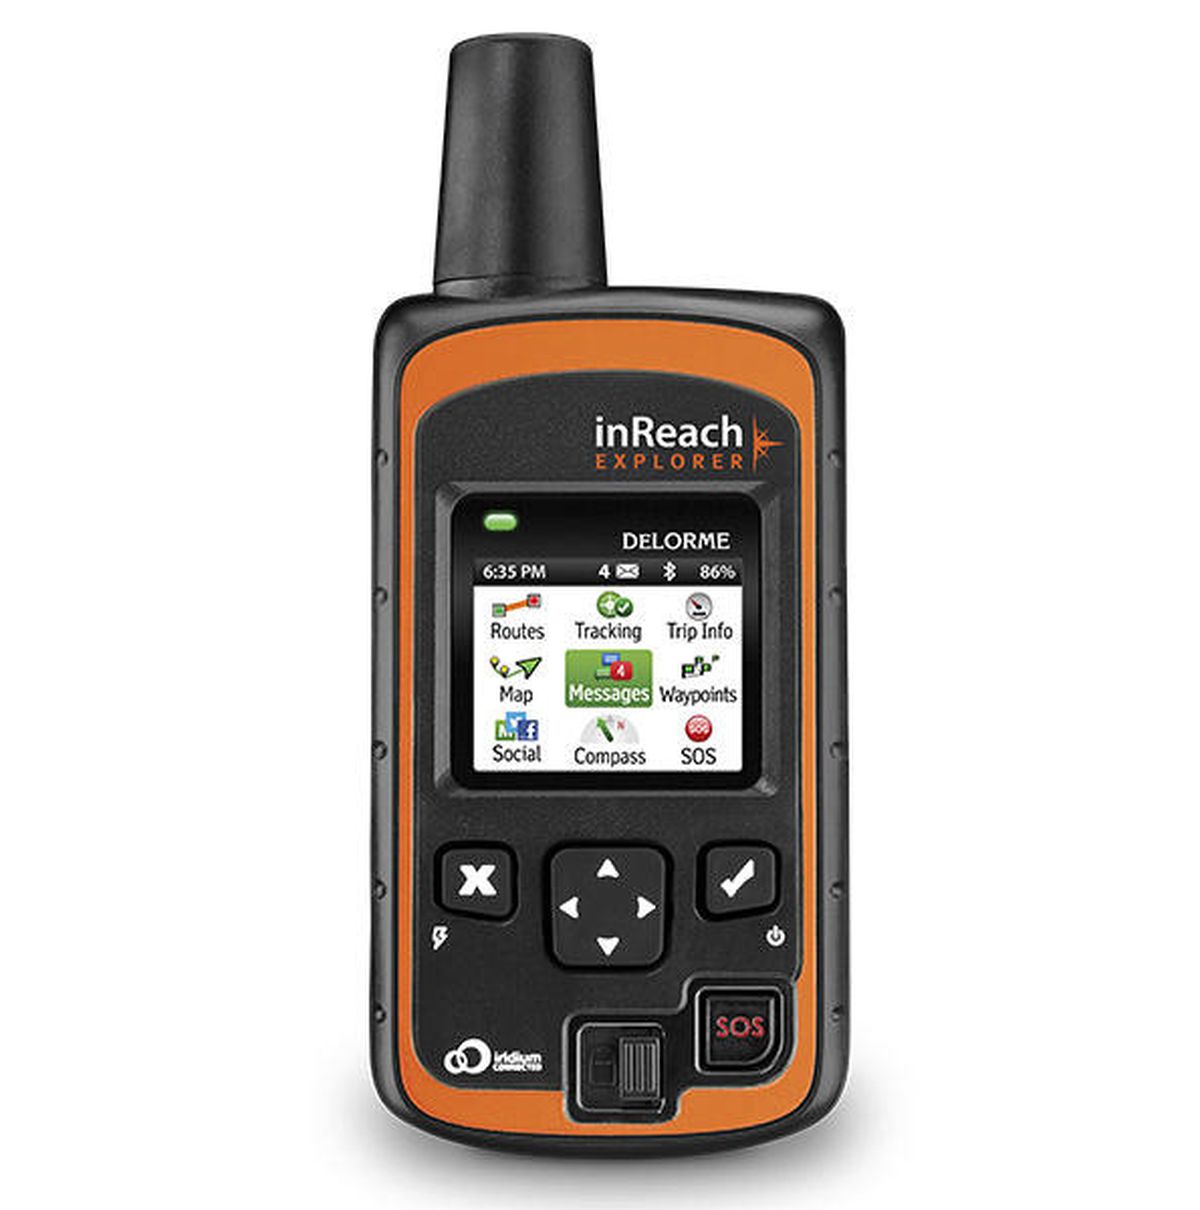 DeLorme’s inReach emergency satellite locator device features two-way commun- ication.